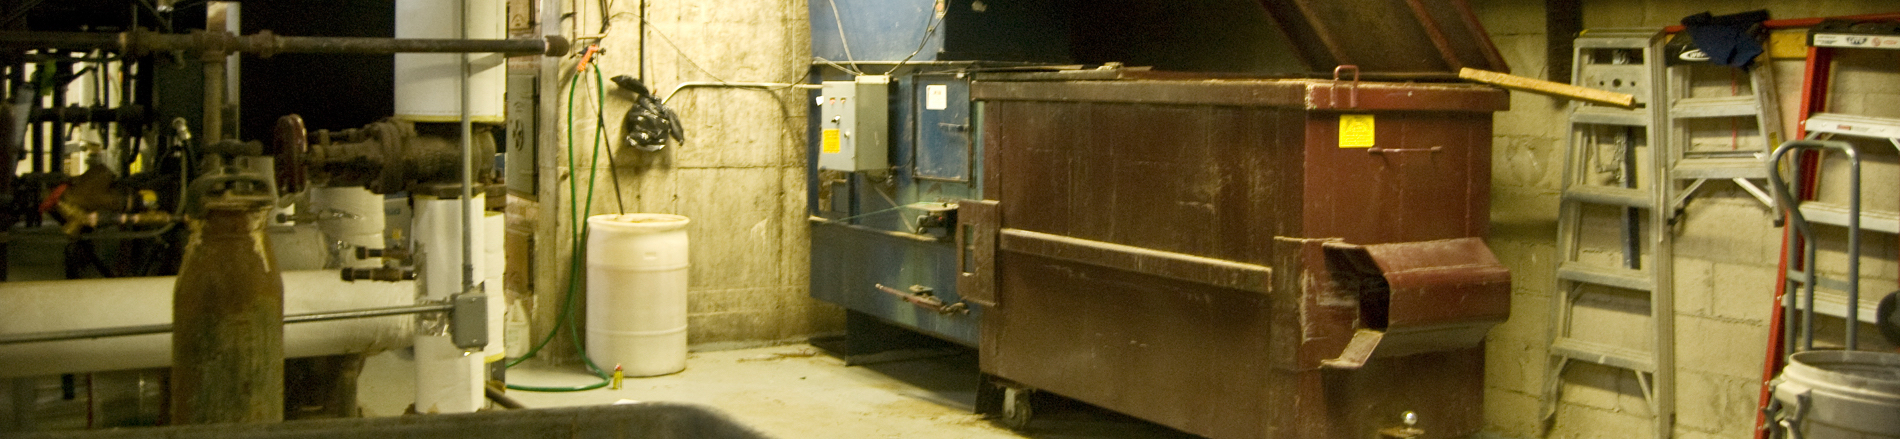 Garbage Compactor Rooms & Chutes